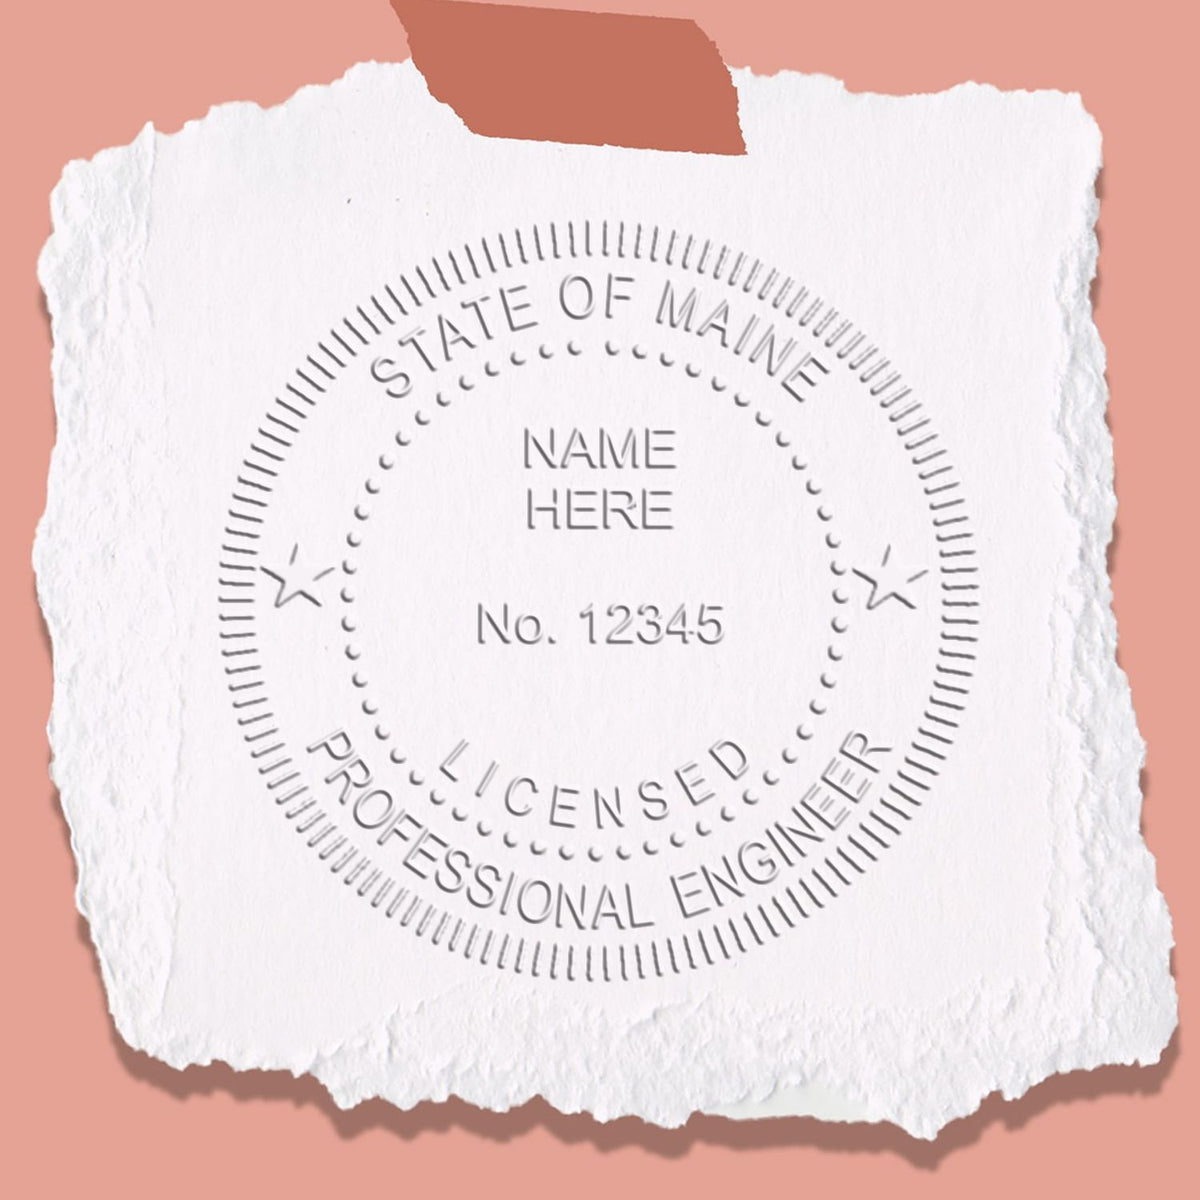 An alternative view of the Heavy Duty Cast Iron Maine Engineer Seal Embosser stamped on a sheet of paper showing the image in use